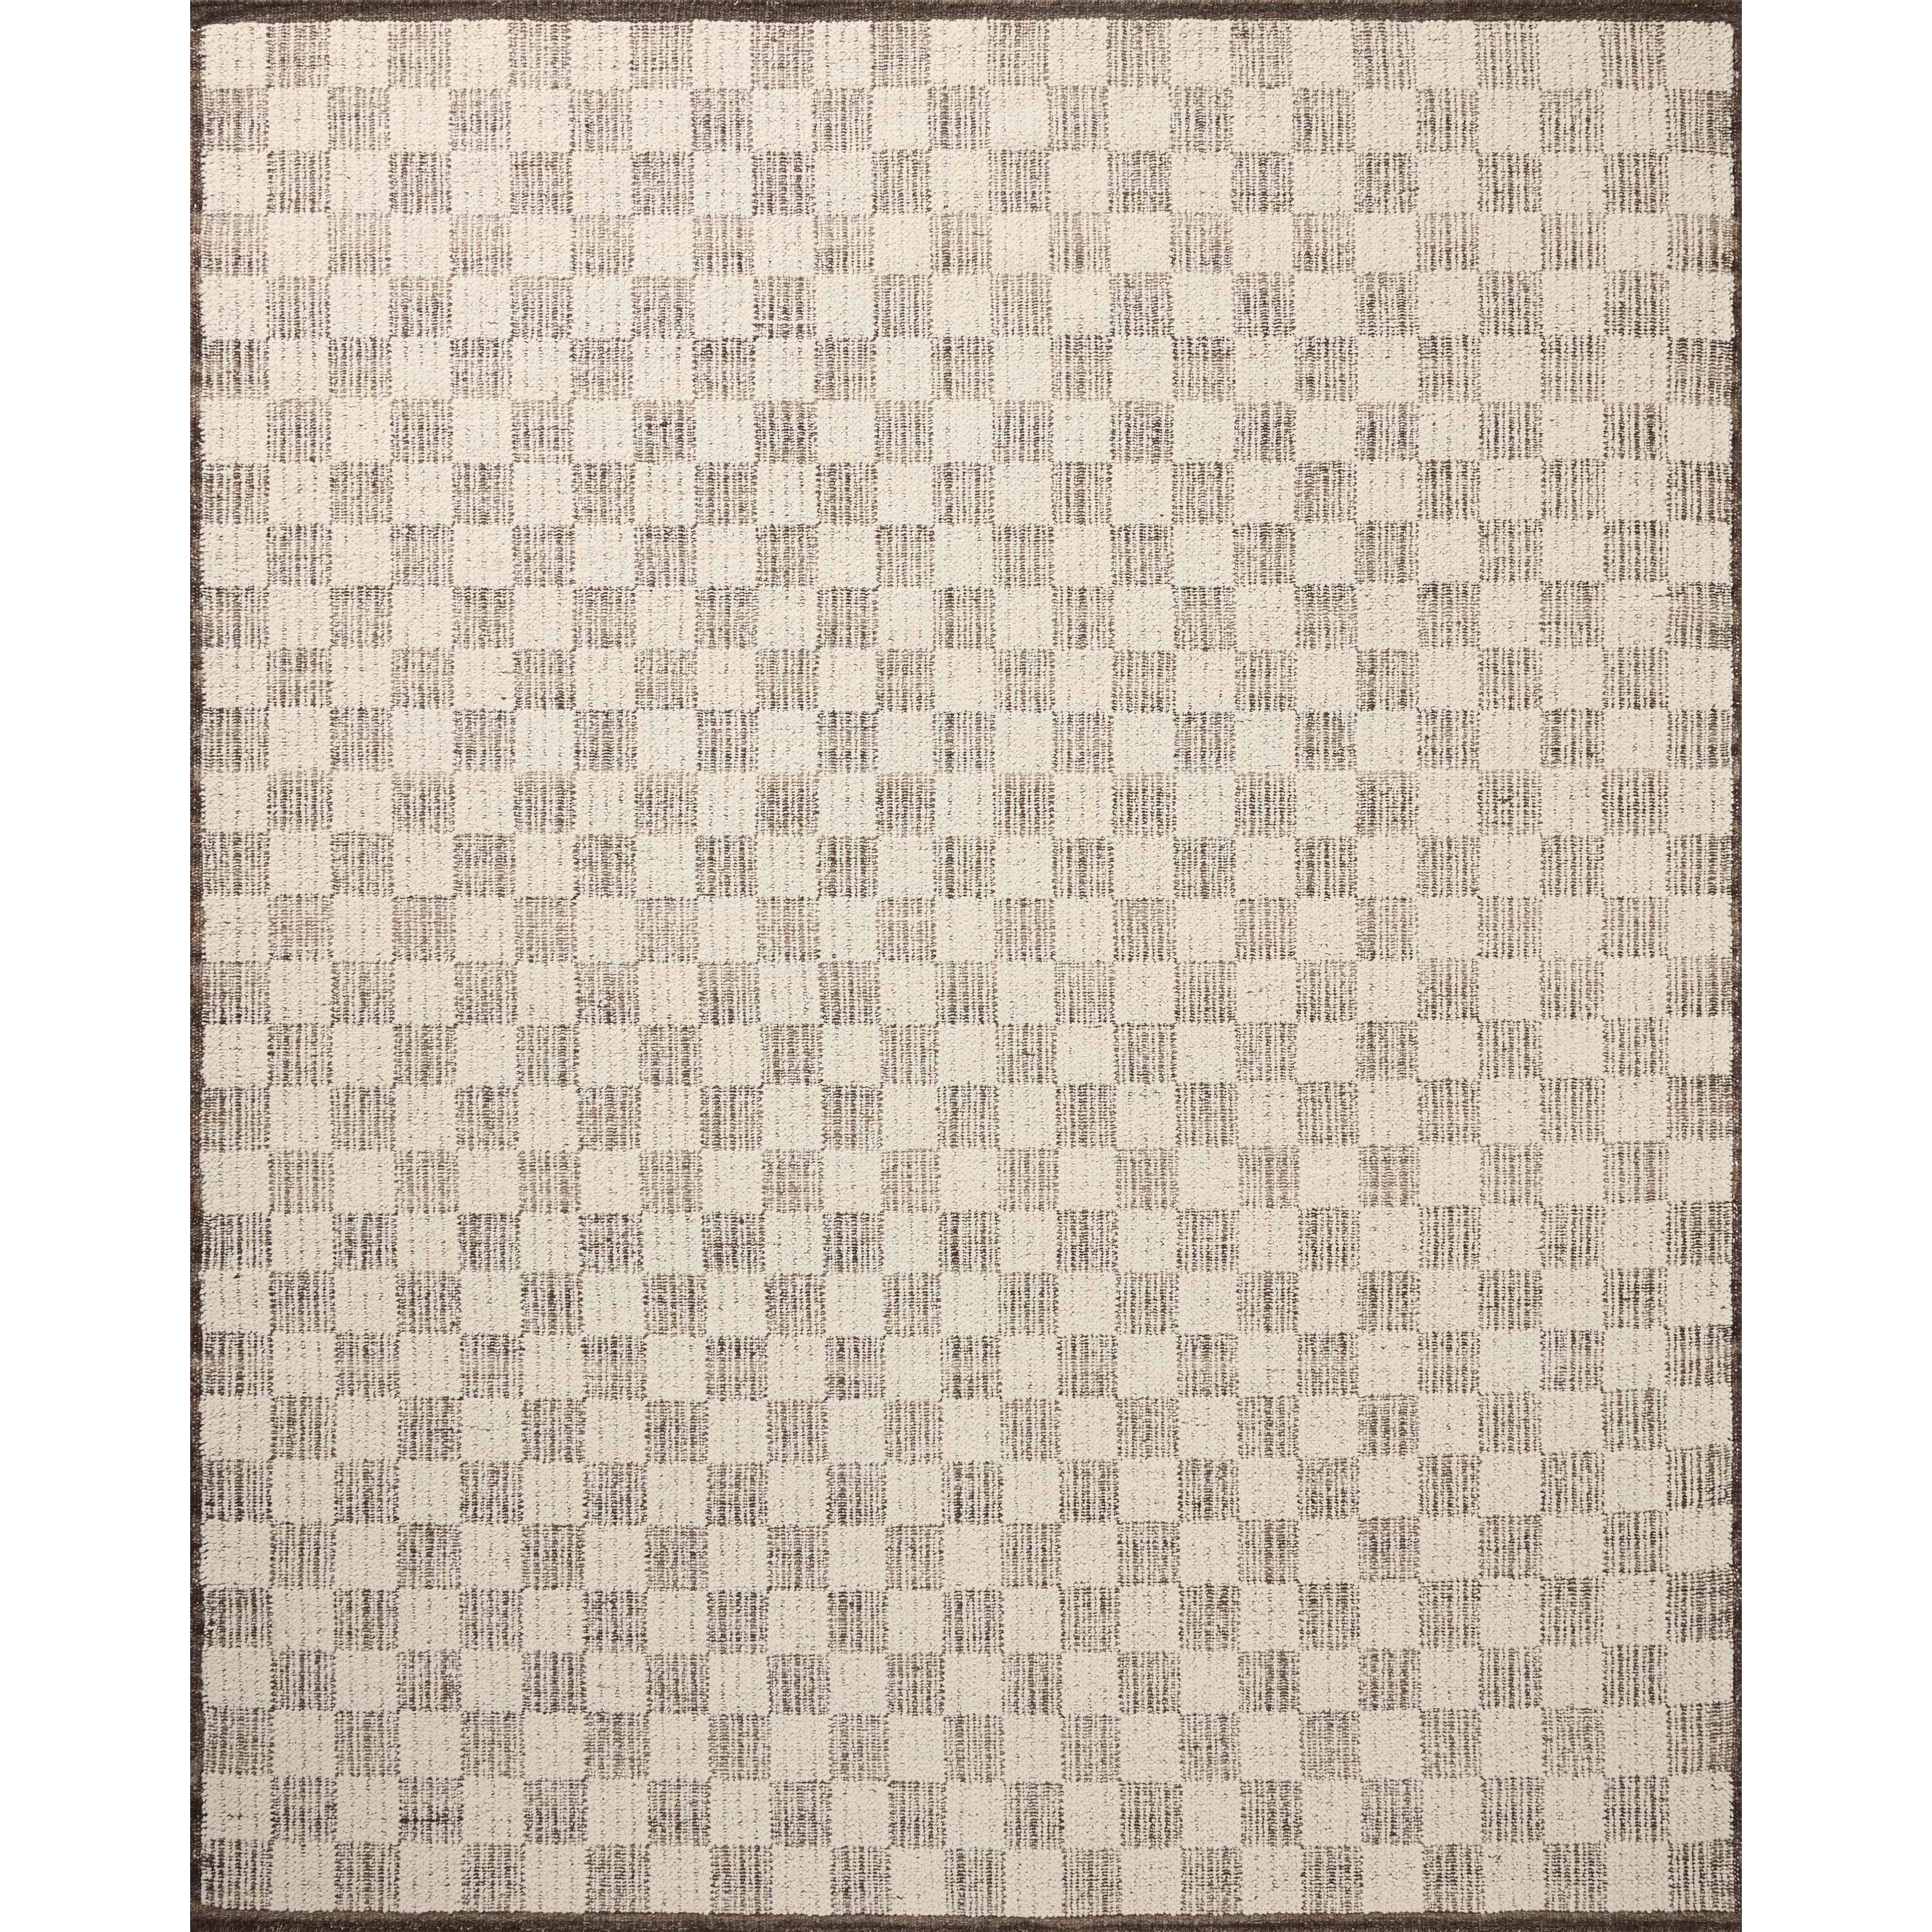 The Knox Ivory / Mocha Rug by Brigette Romanek x Loloi is a handwoven area rug with a contemporary checkerboard pattern and a texture reminiscent of a luxurious knit sweater. Made of a blend of wool and cotton that plays with scale and texture, Knox is imbued with cozy luxury that can anchor any room. Amethyst Home provides interior design, new home construction design consulting, vintage area rugs, and lighting in the Nashville metro area.